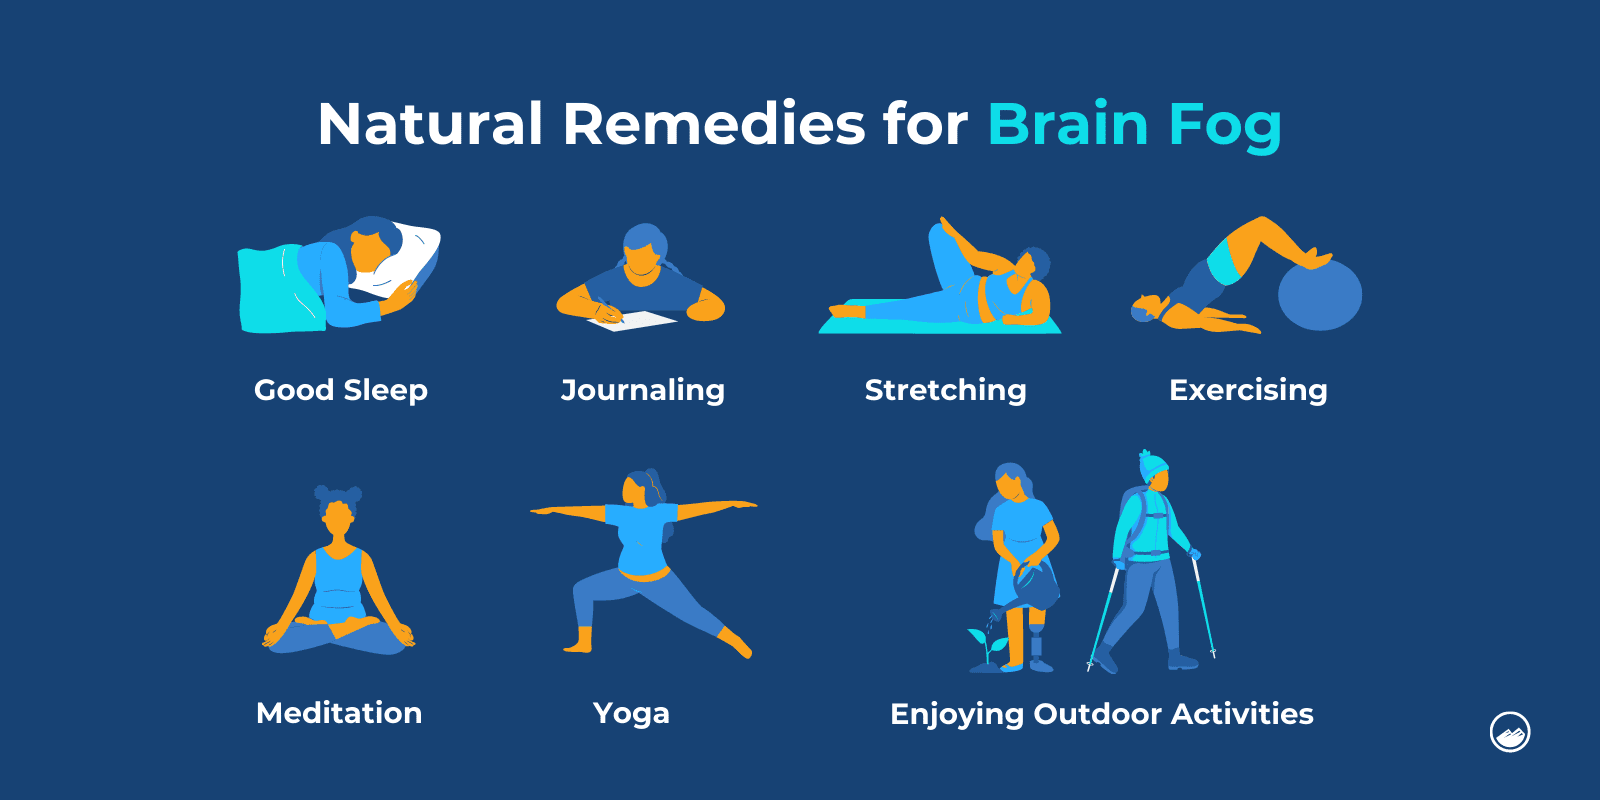 7 Natural remedies for brain fog demonstrated with relevant illustrations